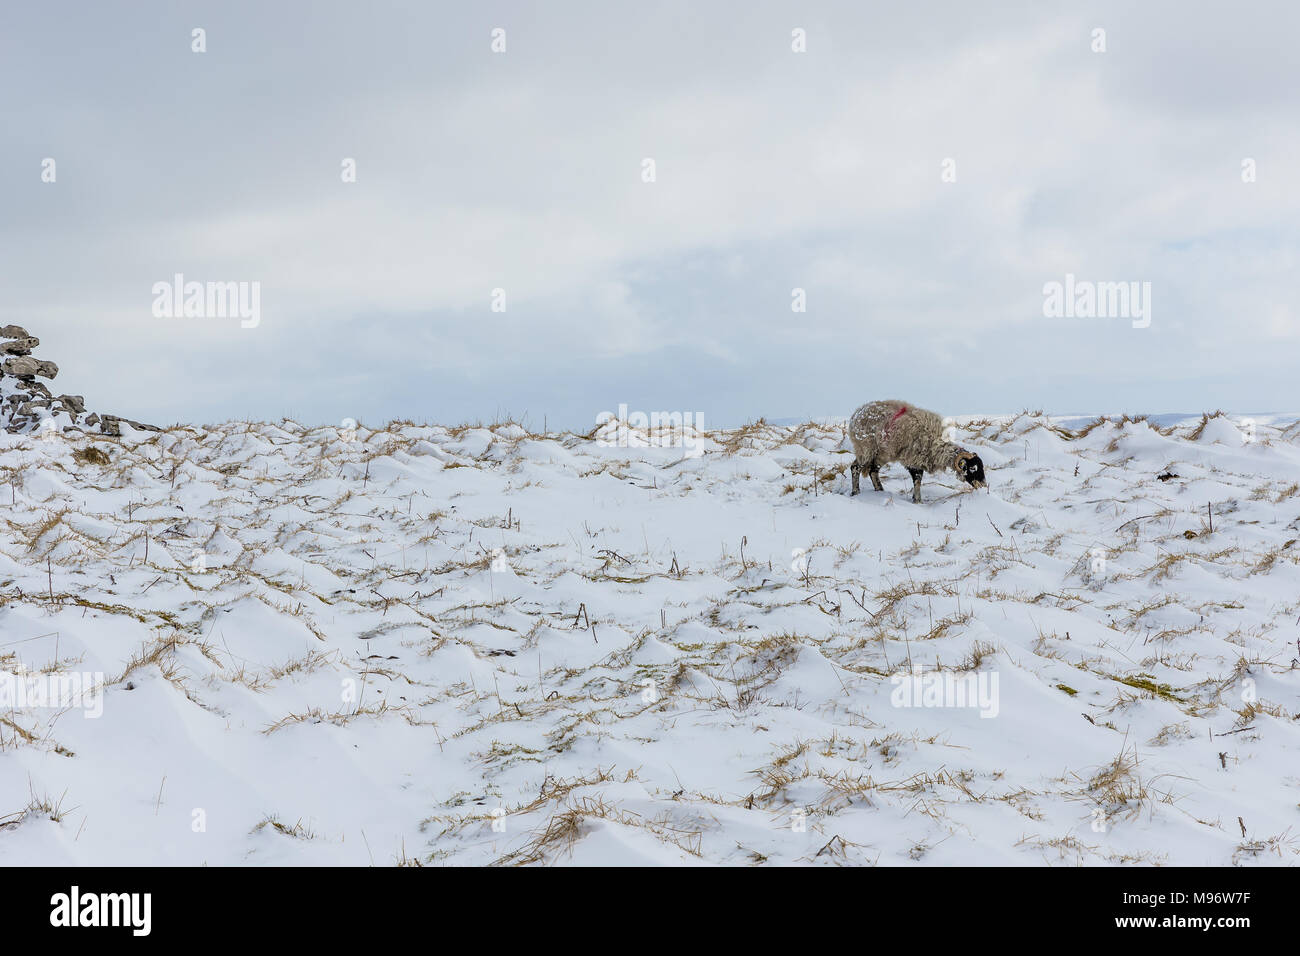 Solitary Swaledale Sheep in the Yorkshire Dales, England, UK during winter.  Snowy, minimalistic winter scene.  Landscape Stock Photo